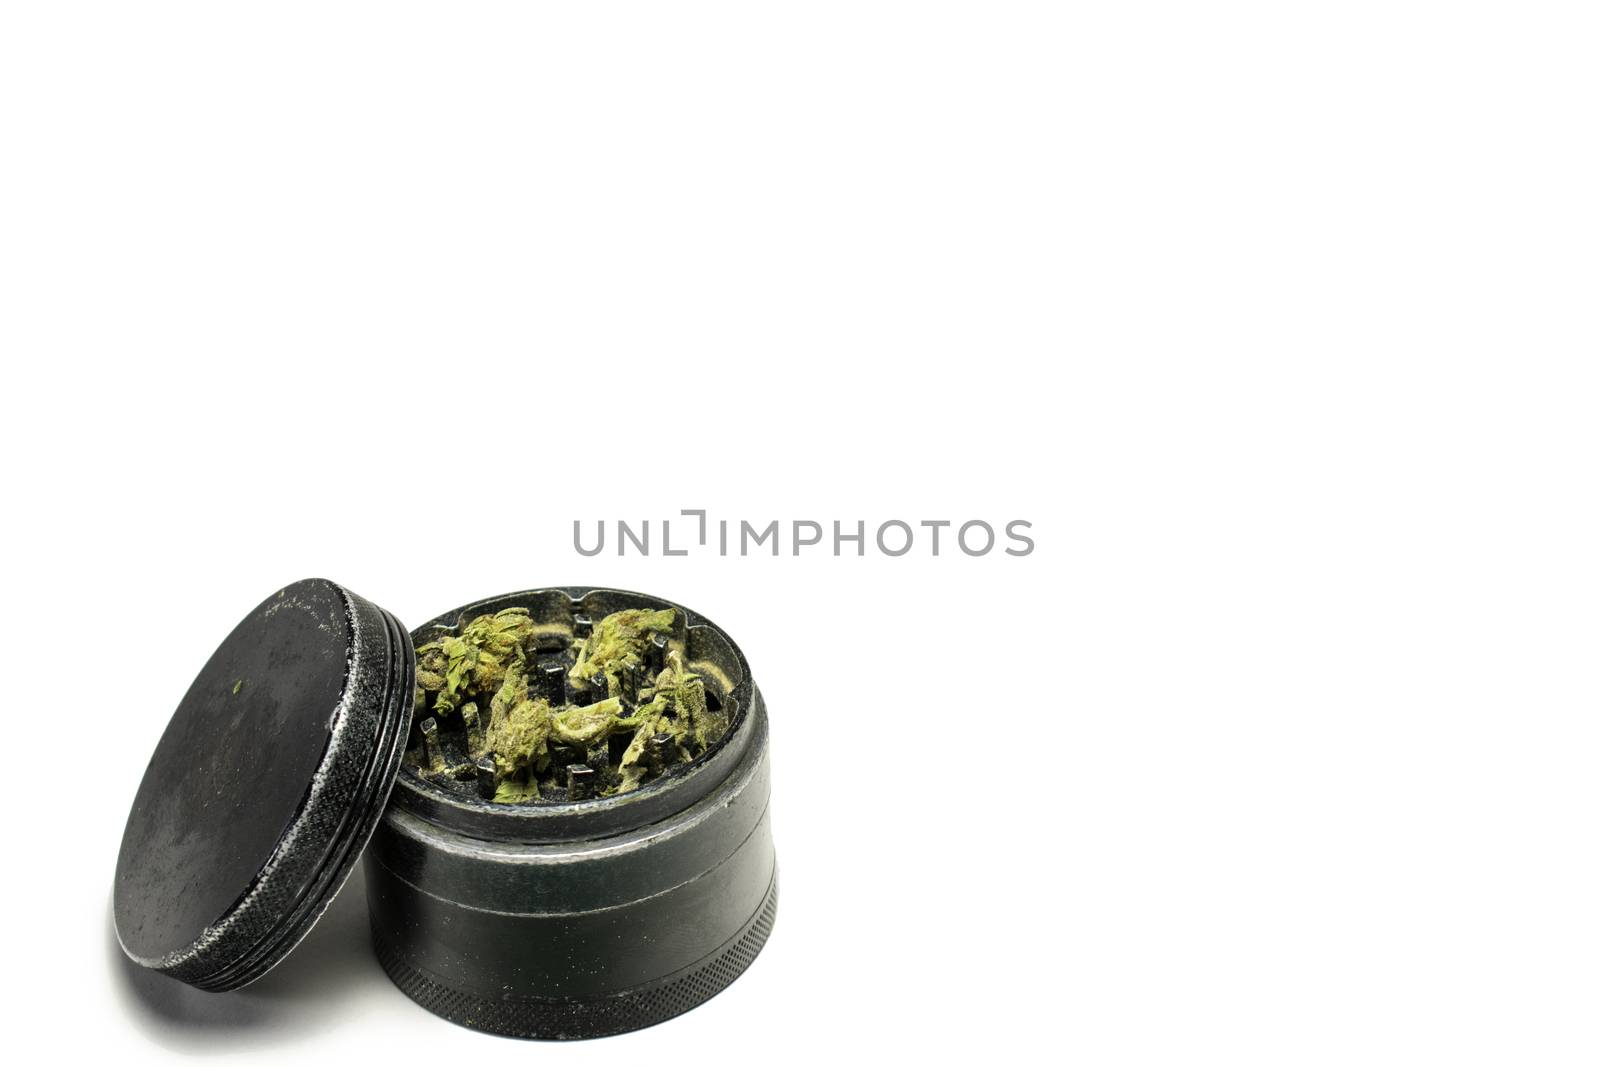 The Top Chamber of a Black and Used Grinder Full of Marijuana on a Pure White Background